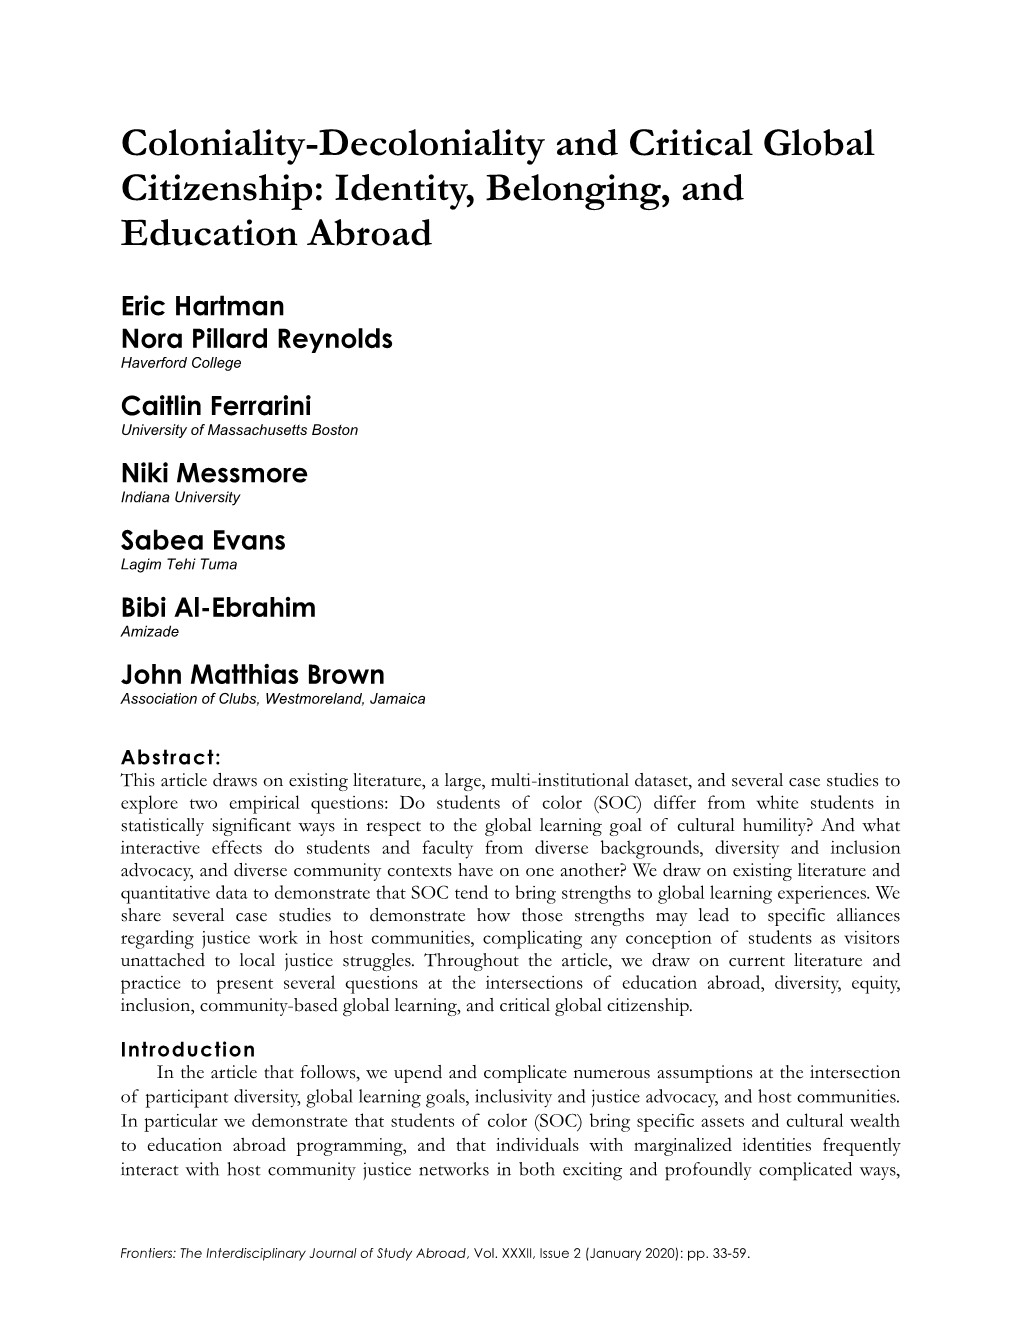 Coloniality-Decoloniality and Critical Global Citizenship: Identity, Belonging, and Education Abroad